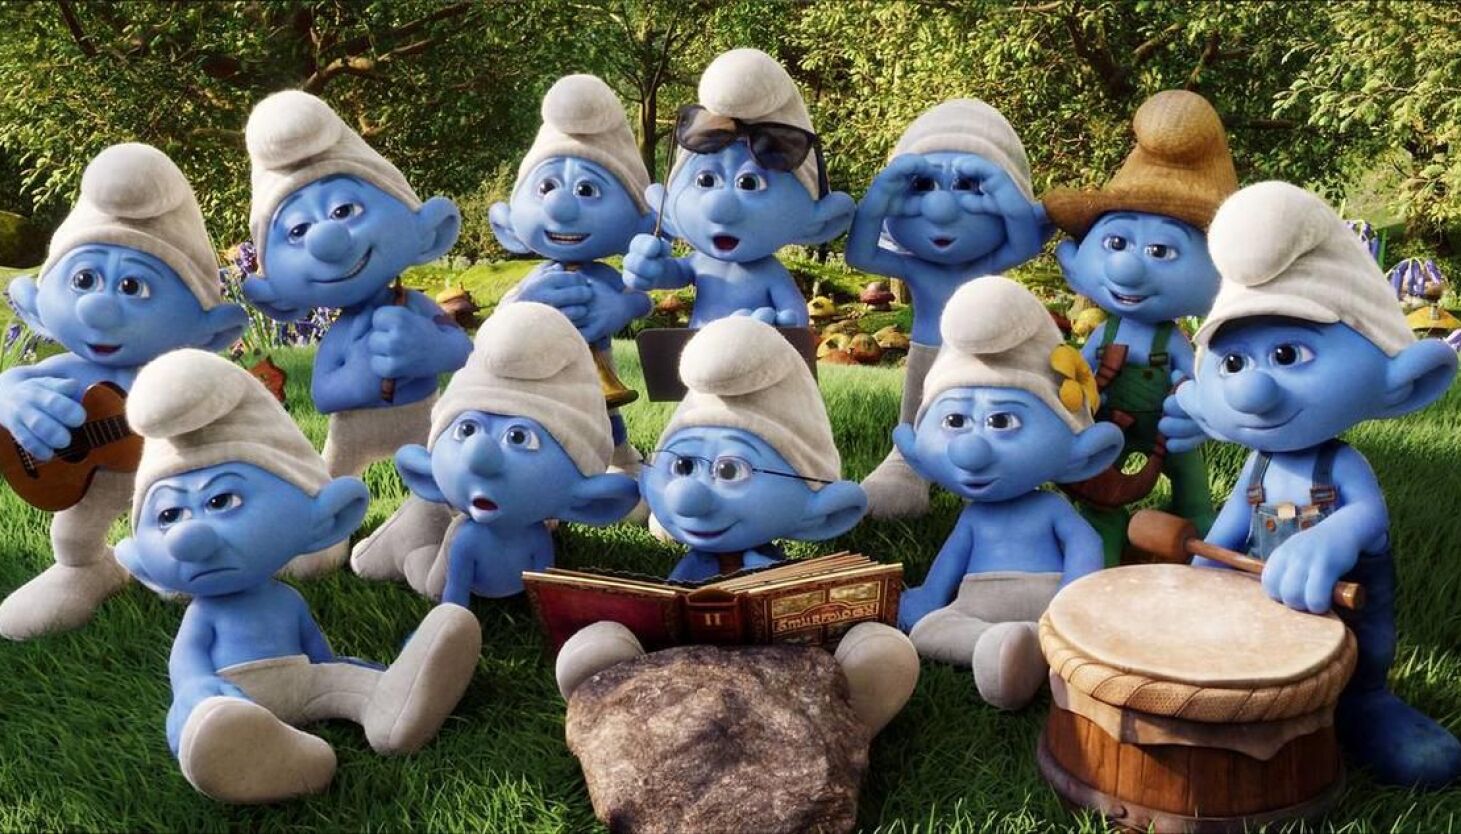 The Smurfs is a popular TV series involving small and blue creatures.